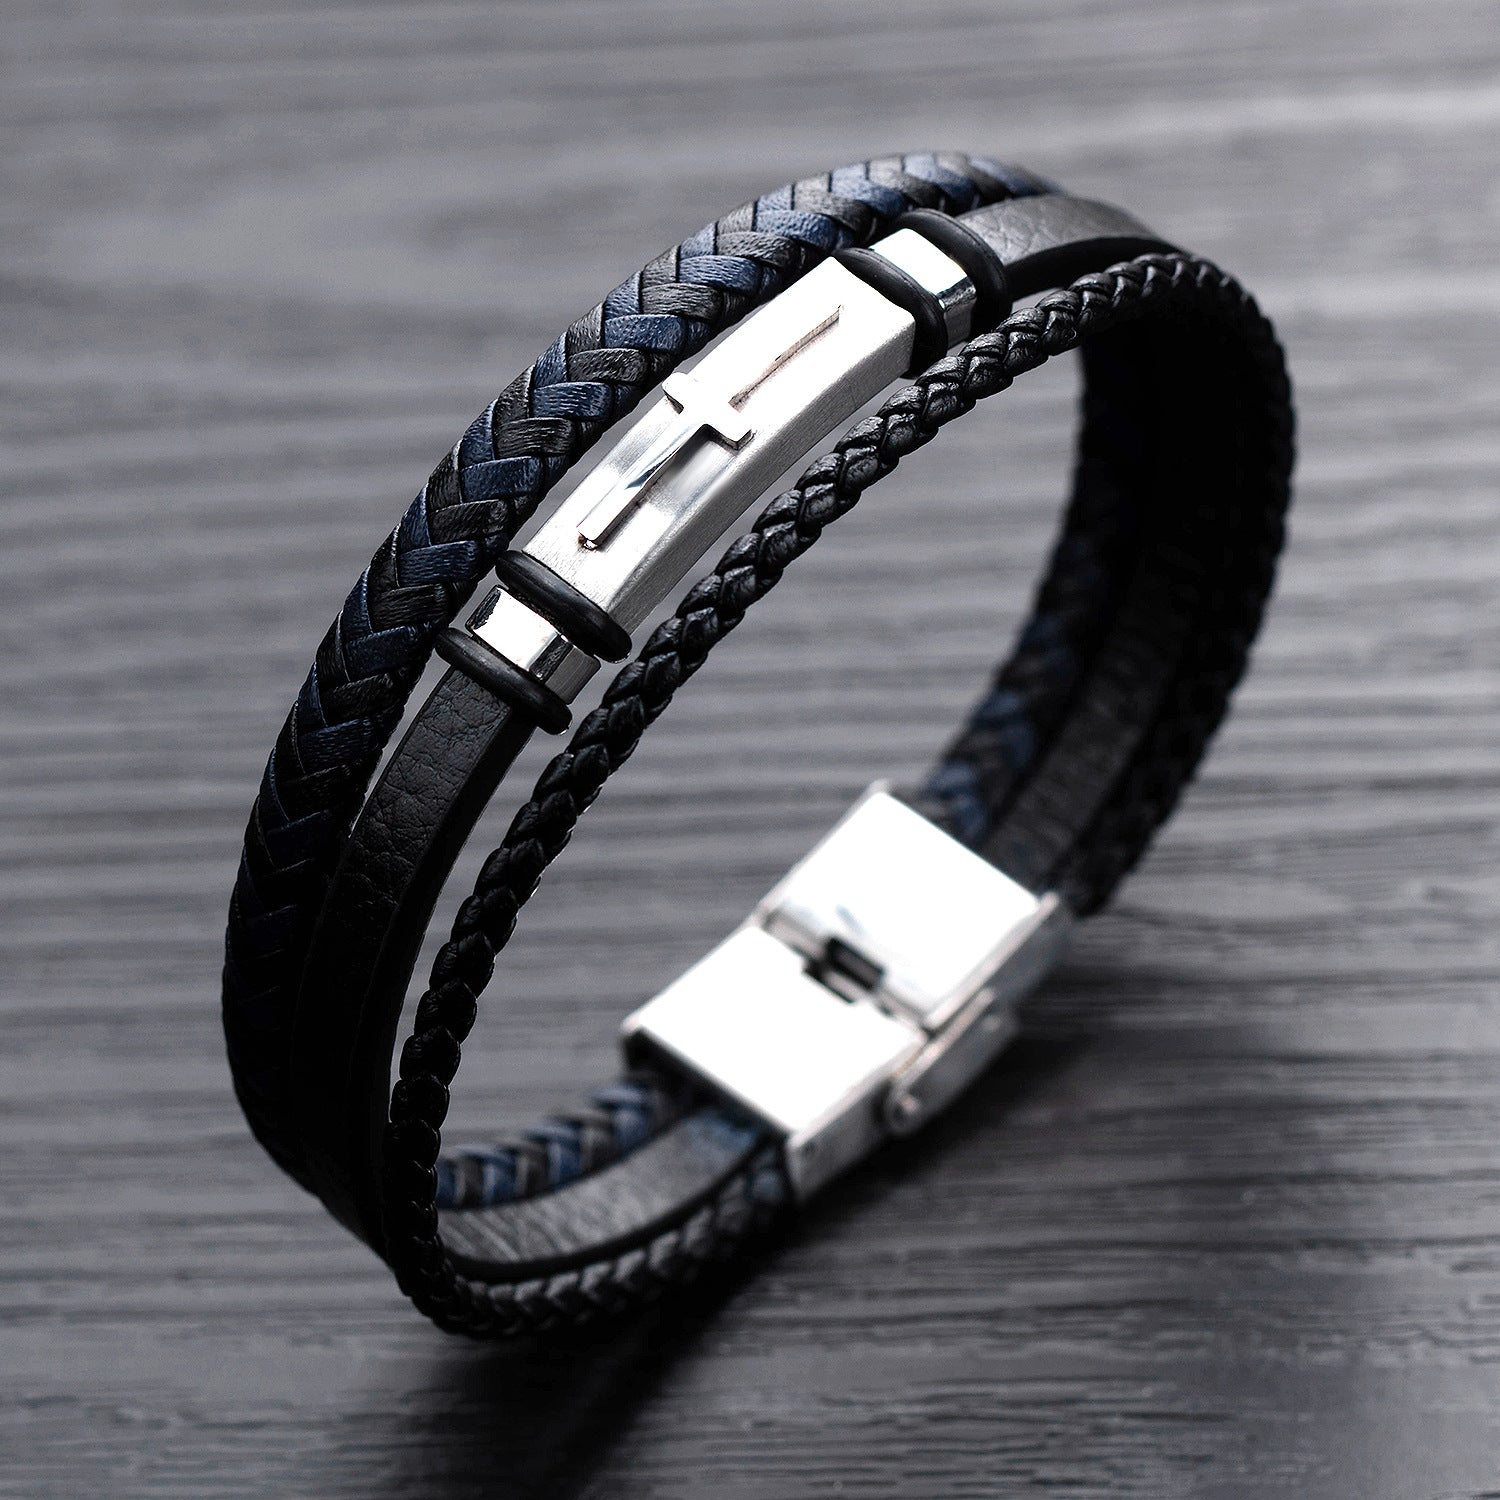 Double Row Bracelet Mens Leather Bracelet with Magnetic Clasp Cowhide Multi-Layer Braided Leather Mens Bracelet I Will Always Be with You for Son Stainless Steel Bracelet 